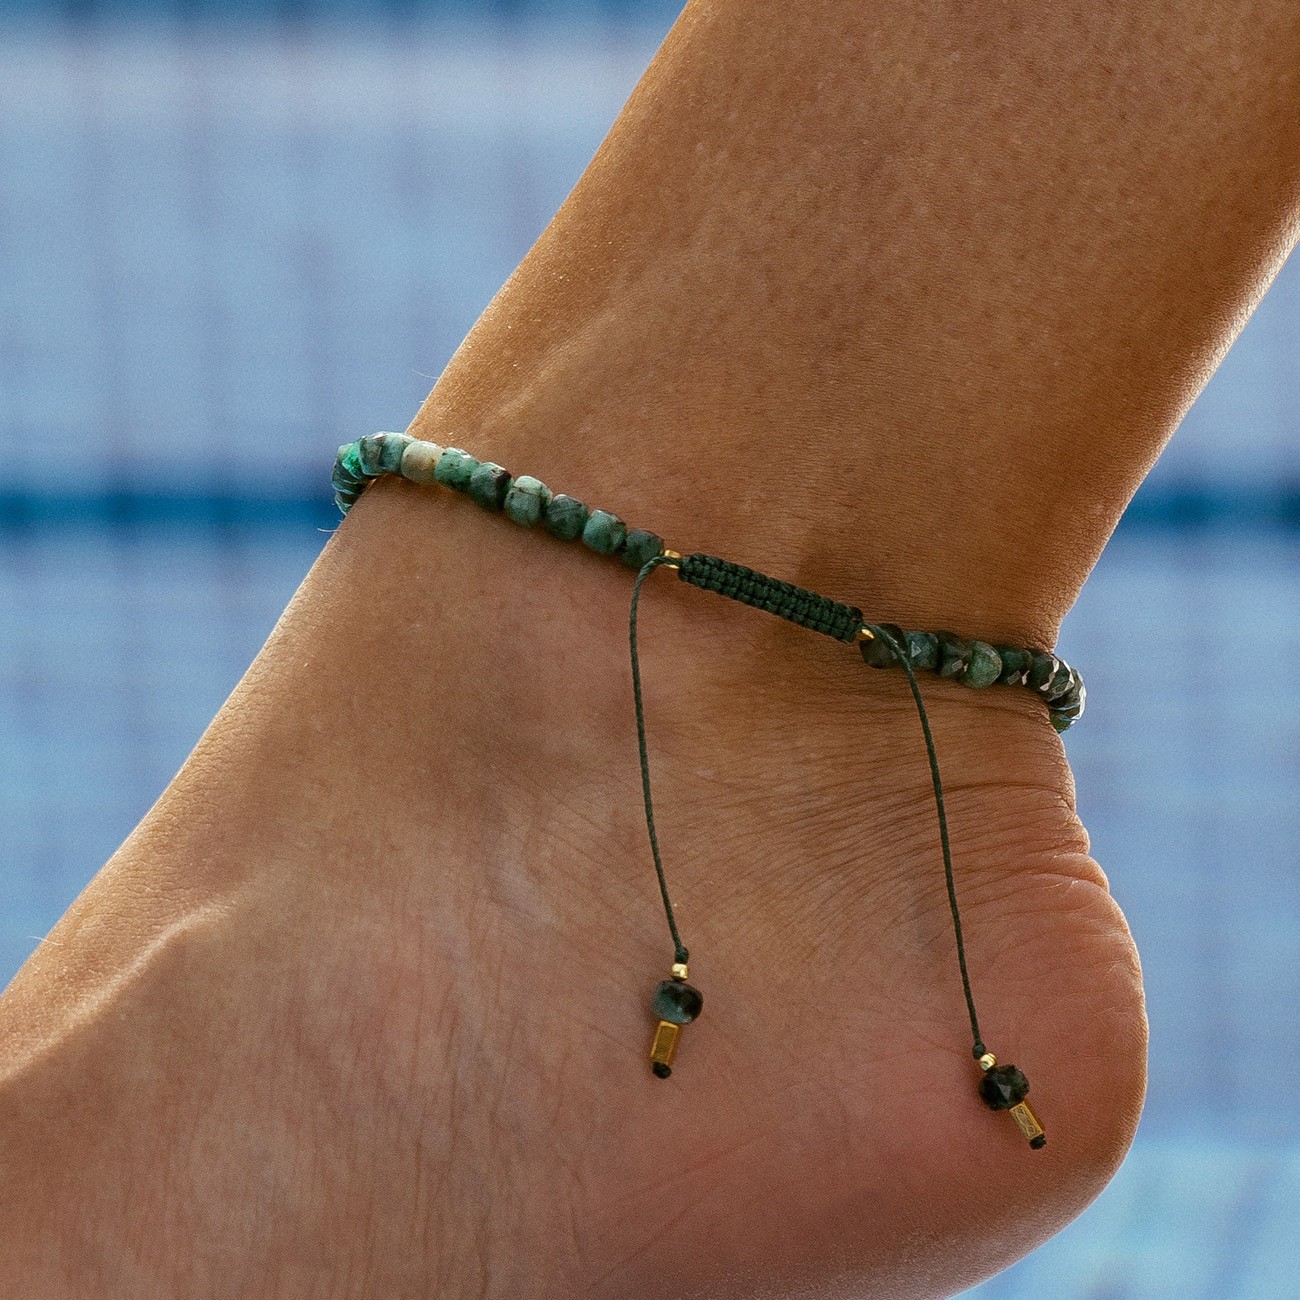 Silver anklet with natural stone - emerald